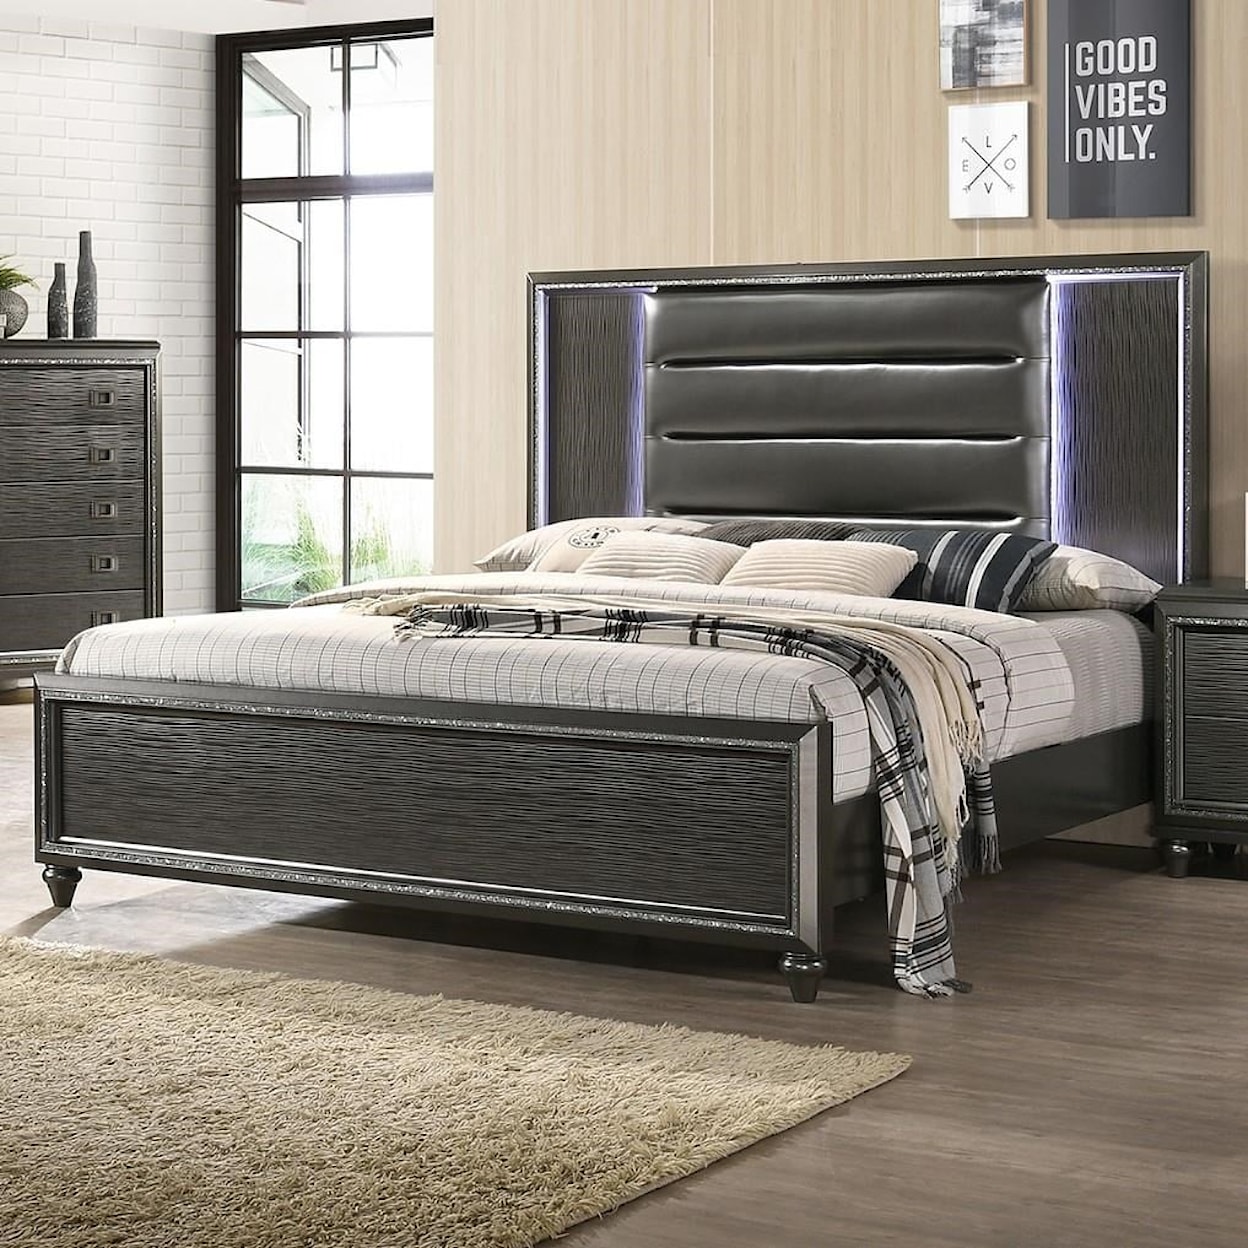 Elements Moonstone Twin Upholstered Bed